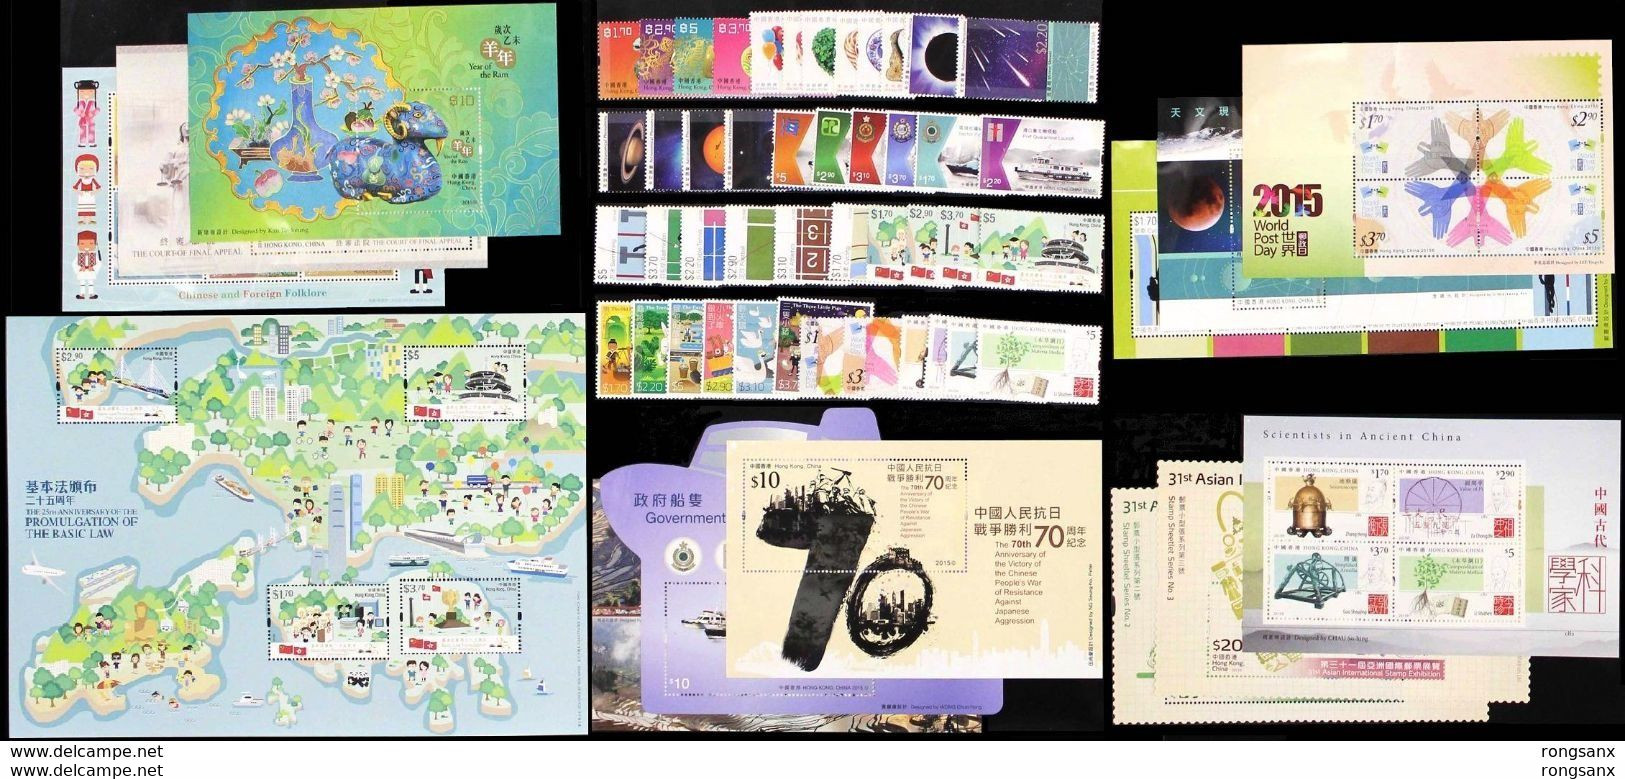 2015 HONG KONG  YEAR PACK INCLUDE MS AND STAMP SEE PIC WITH ALBUM - Años Completos